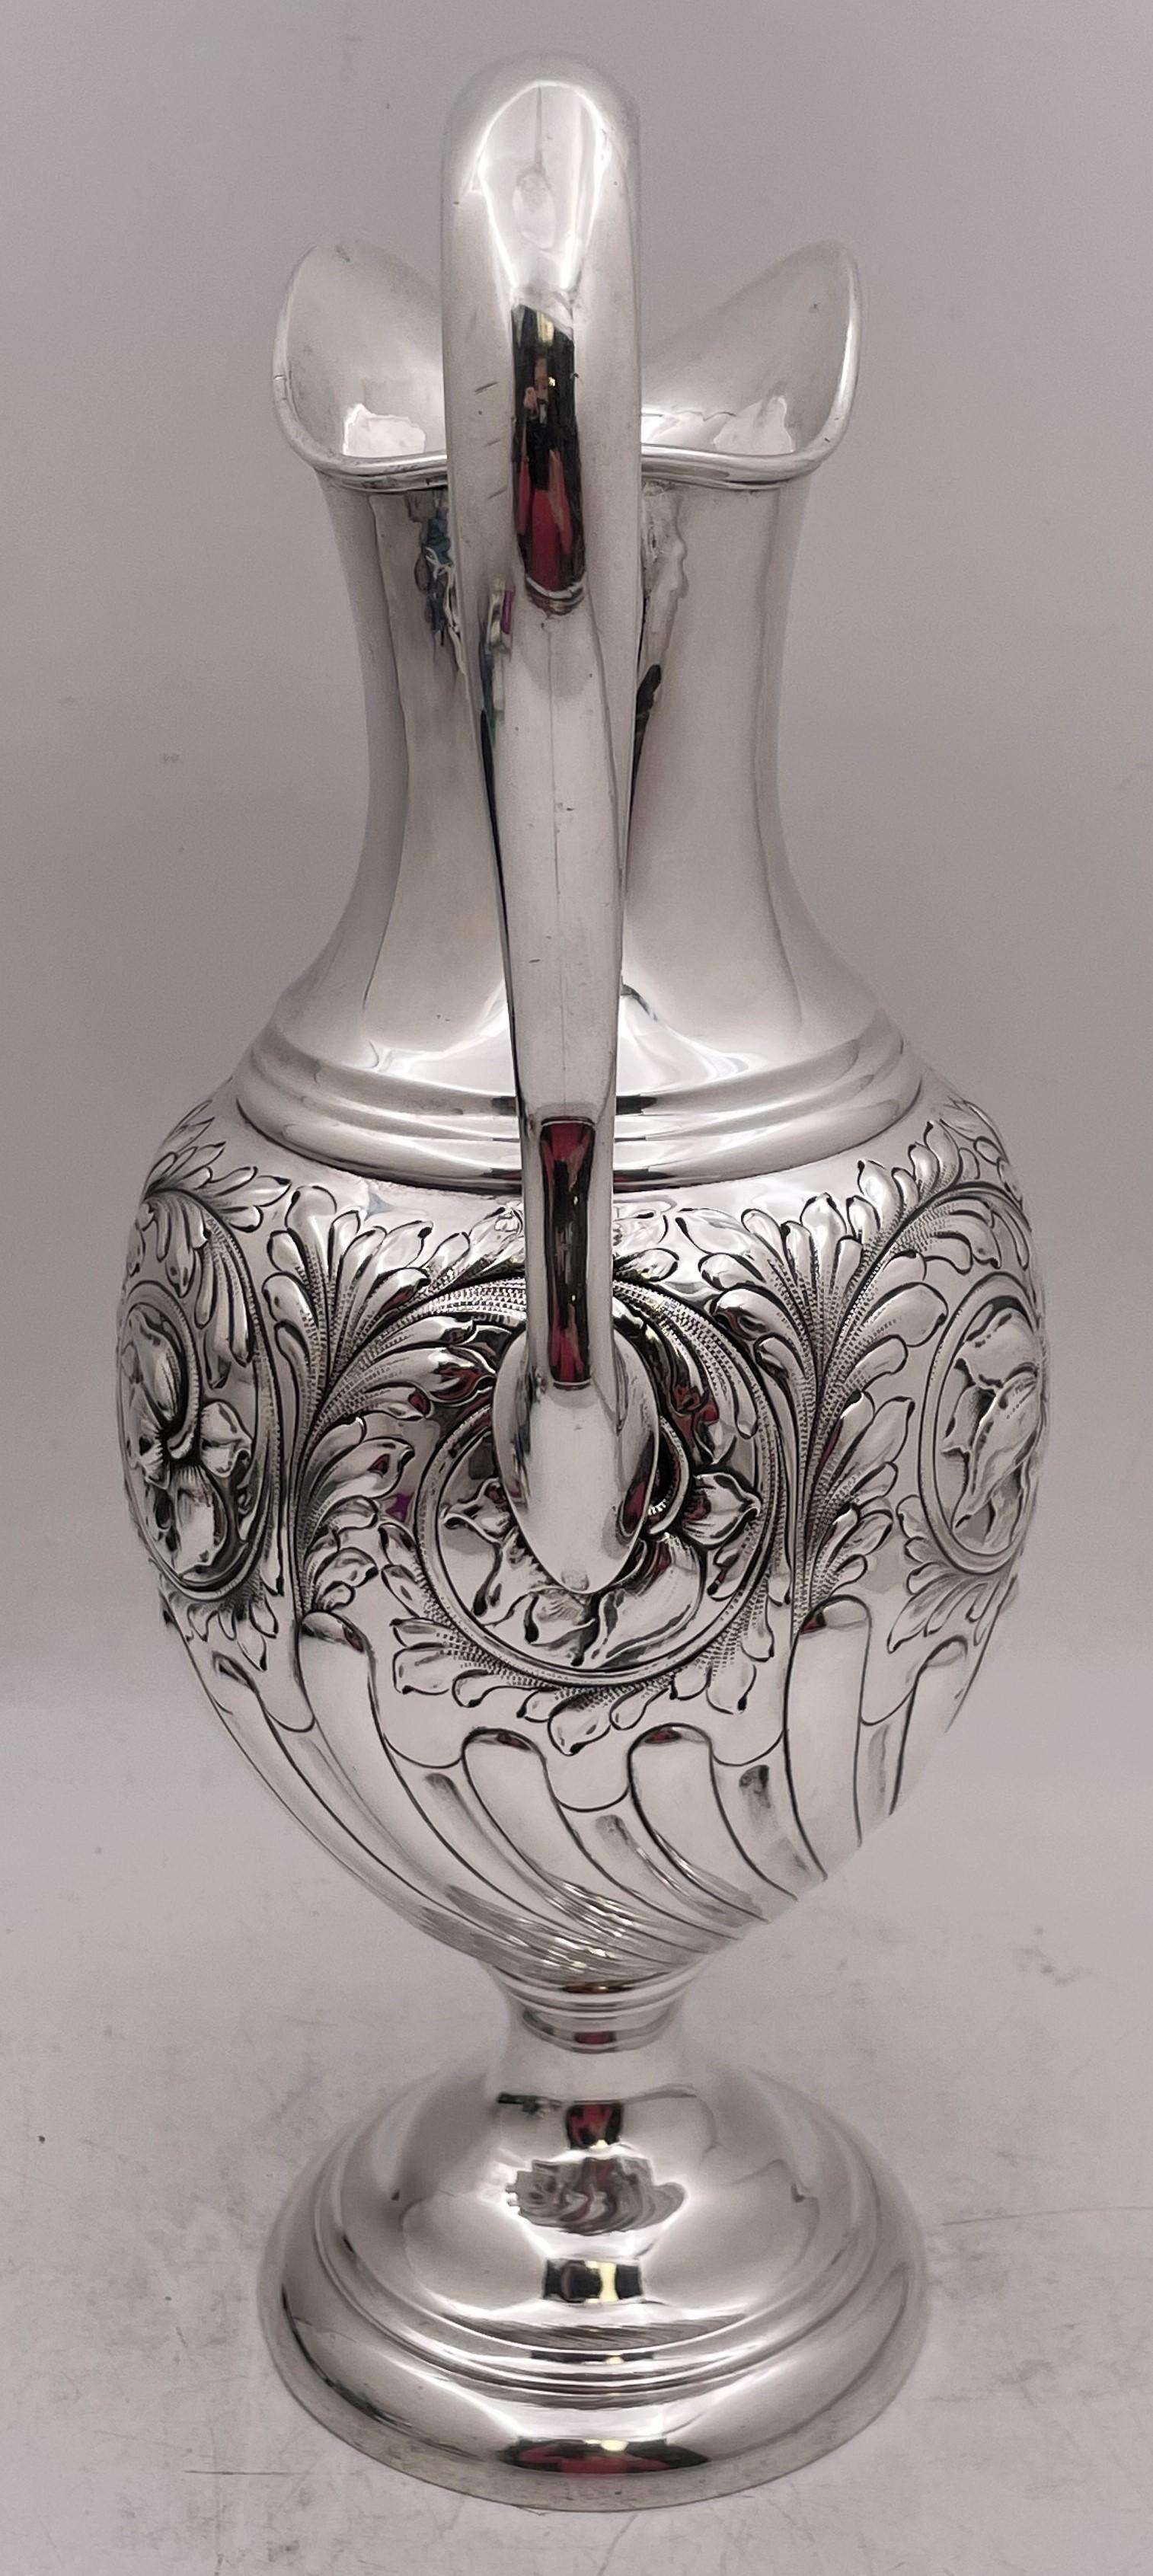 Lebkuecher Sterling Silver Pitcher Jug in Art Nouveau Style Early 20th Century In Good Condition For Sale In New York, NY